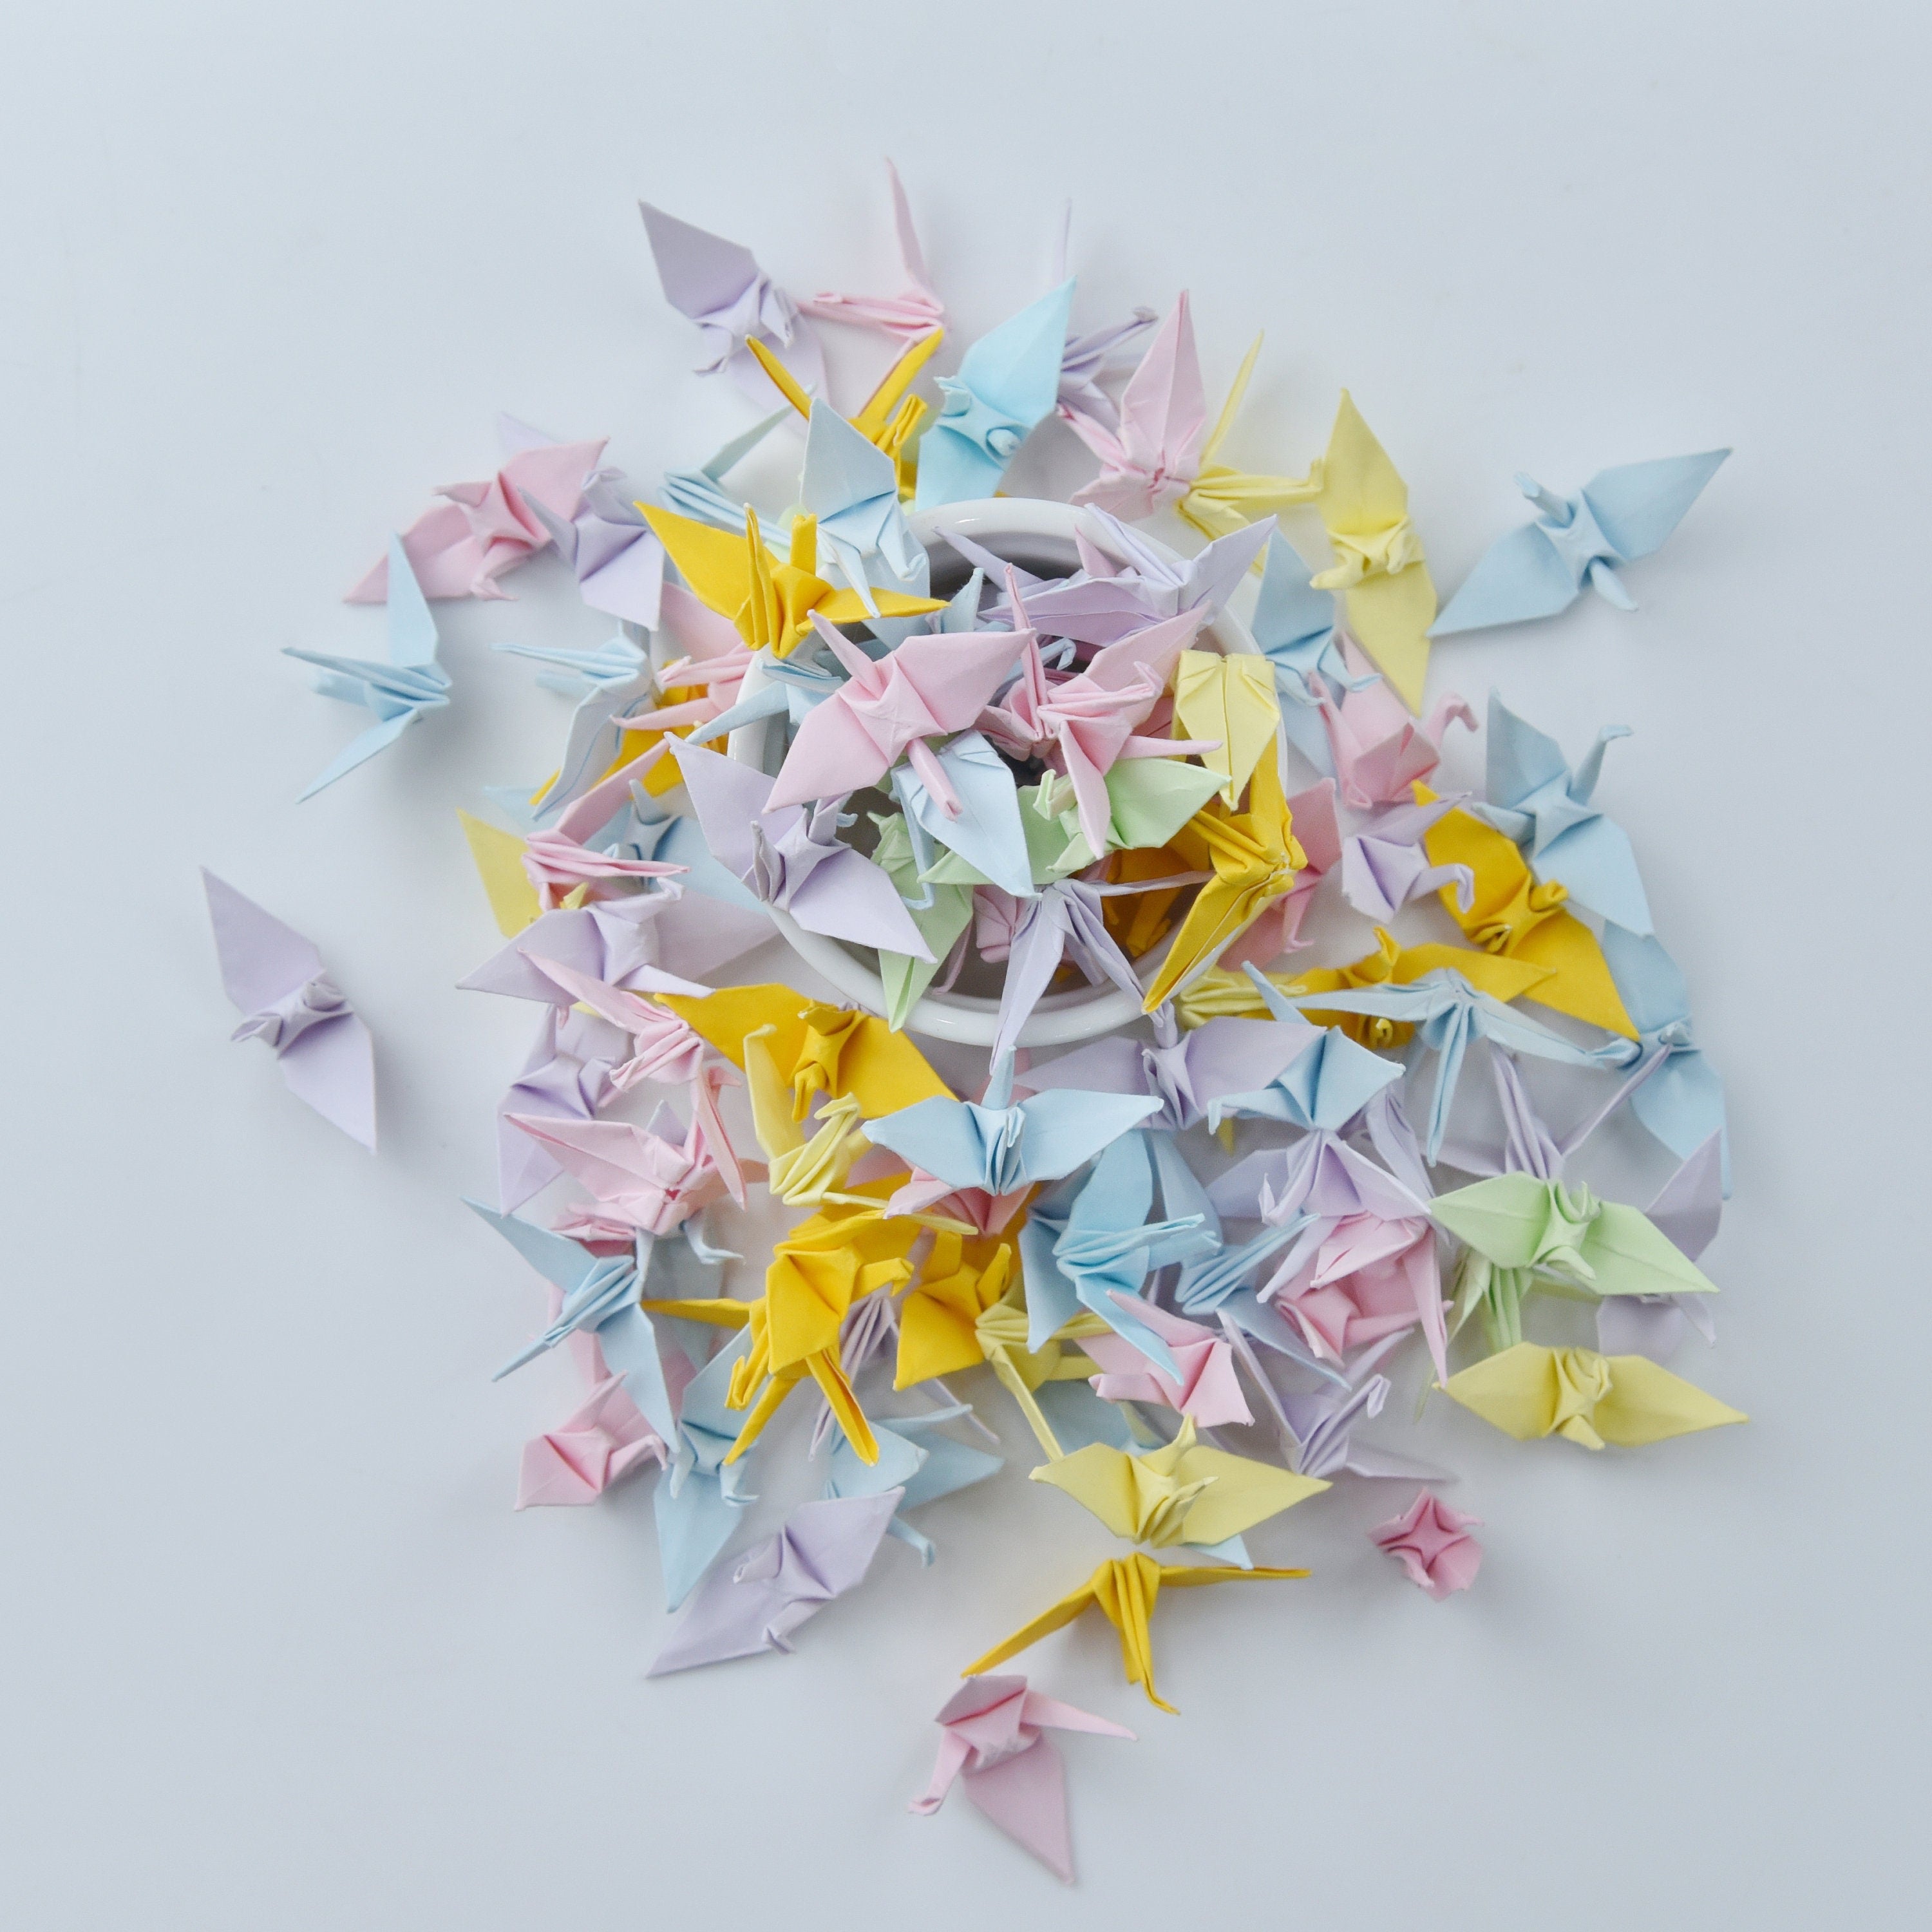 100 Origami Paper Crane Mixed Color 3.81 cm (1.5 inches) Japanese Origami Wedding Gift, Decoration, Wedding Backdrop